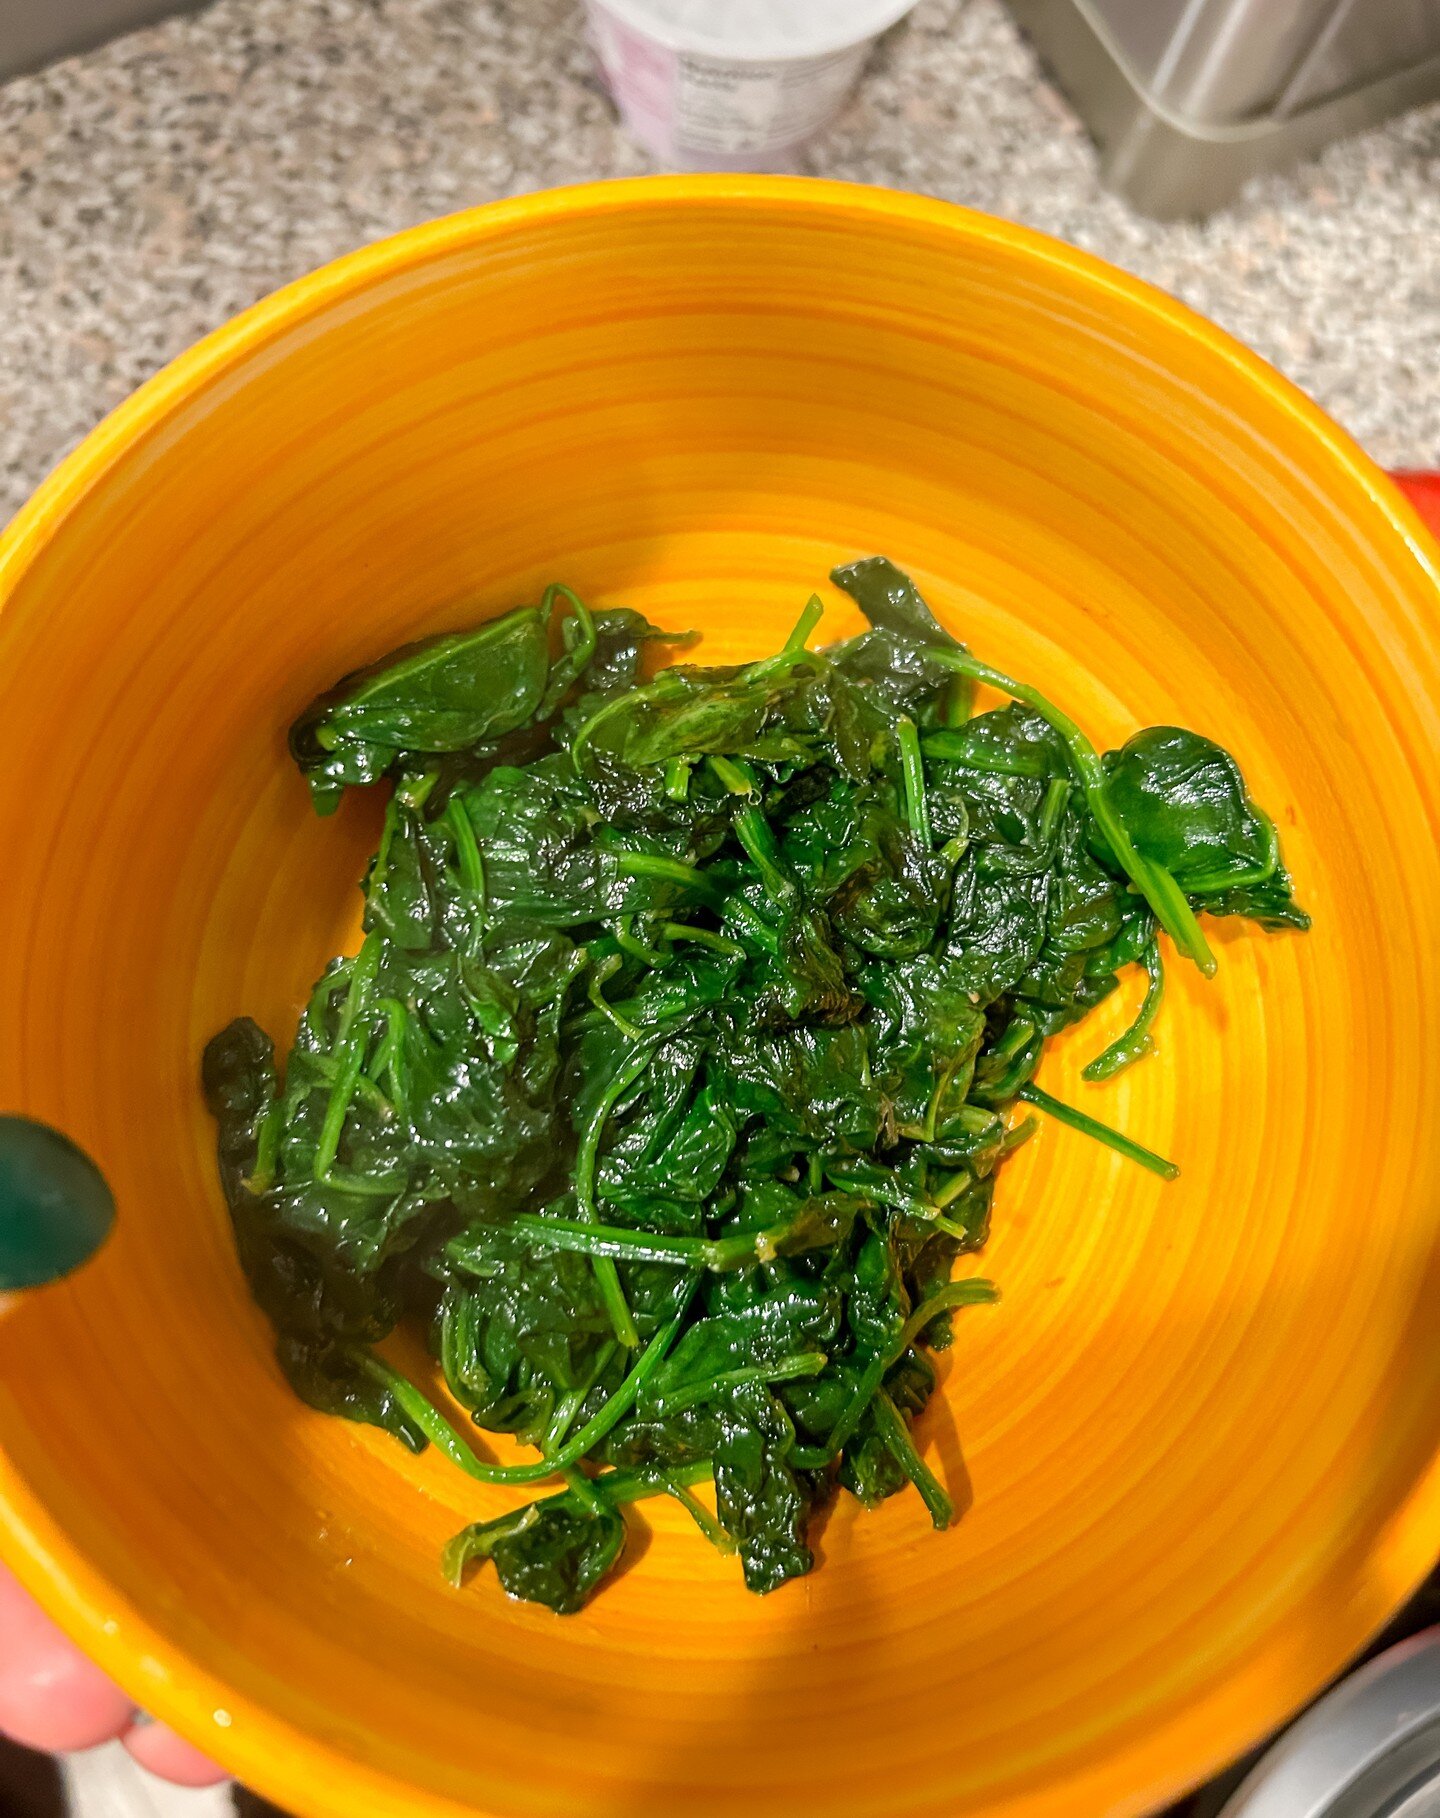 Let's talk about spinach. The first photo is a WHOLE BAG of saut&eacute;ed spinach! 🥬

Spinach is a highly nutritious and delicious food that provides you with so many vitamins and minerals including:
1. Vitamin A
2. Vitamin C
3. Potassium
4. Iron
5